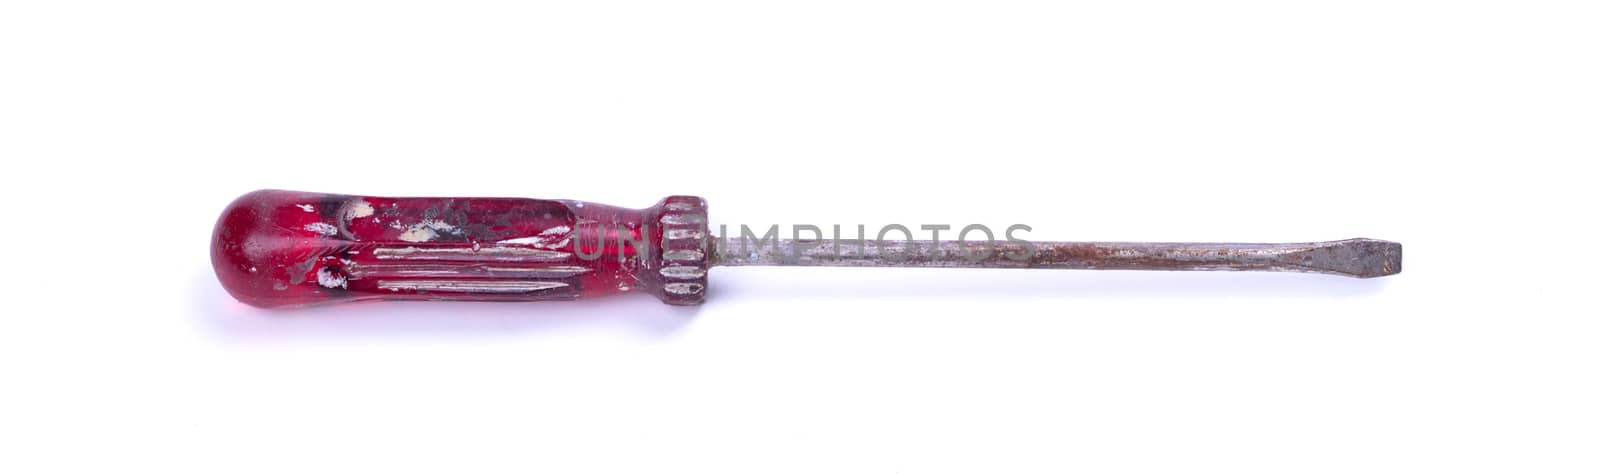 Old screwdriver isolated on a white background